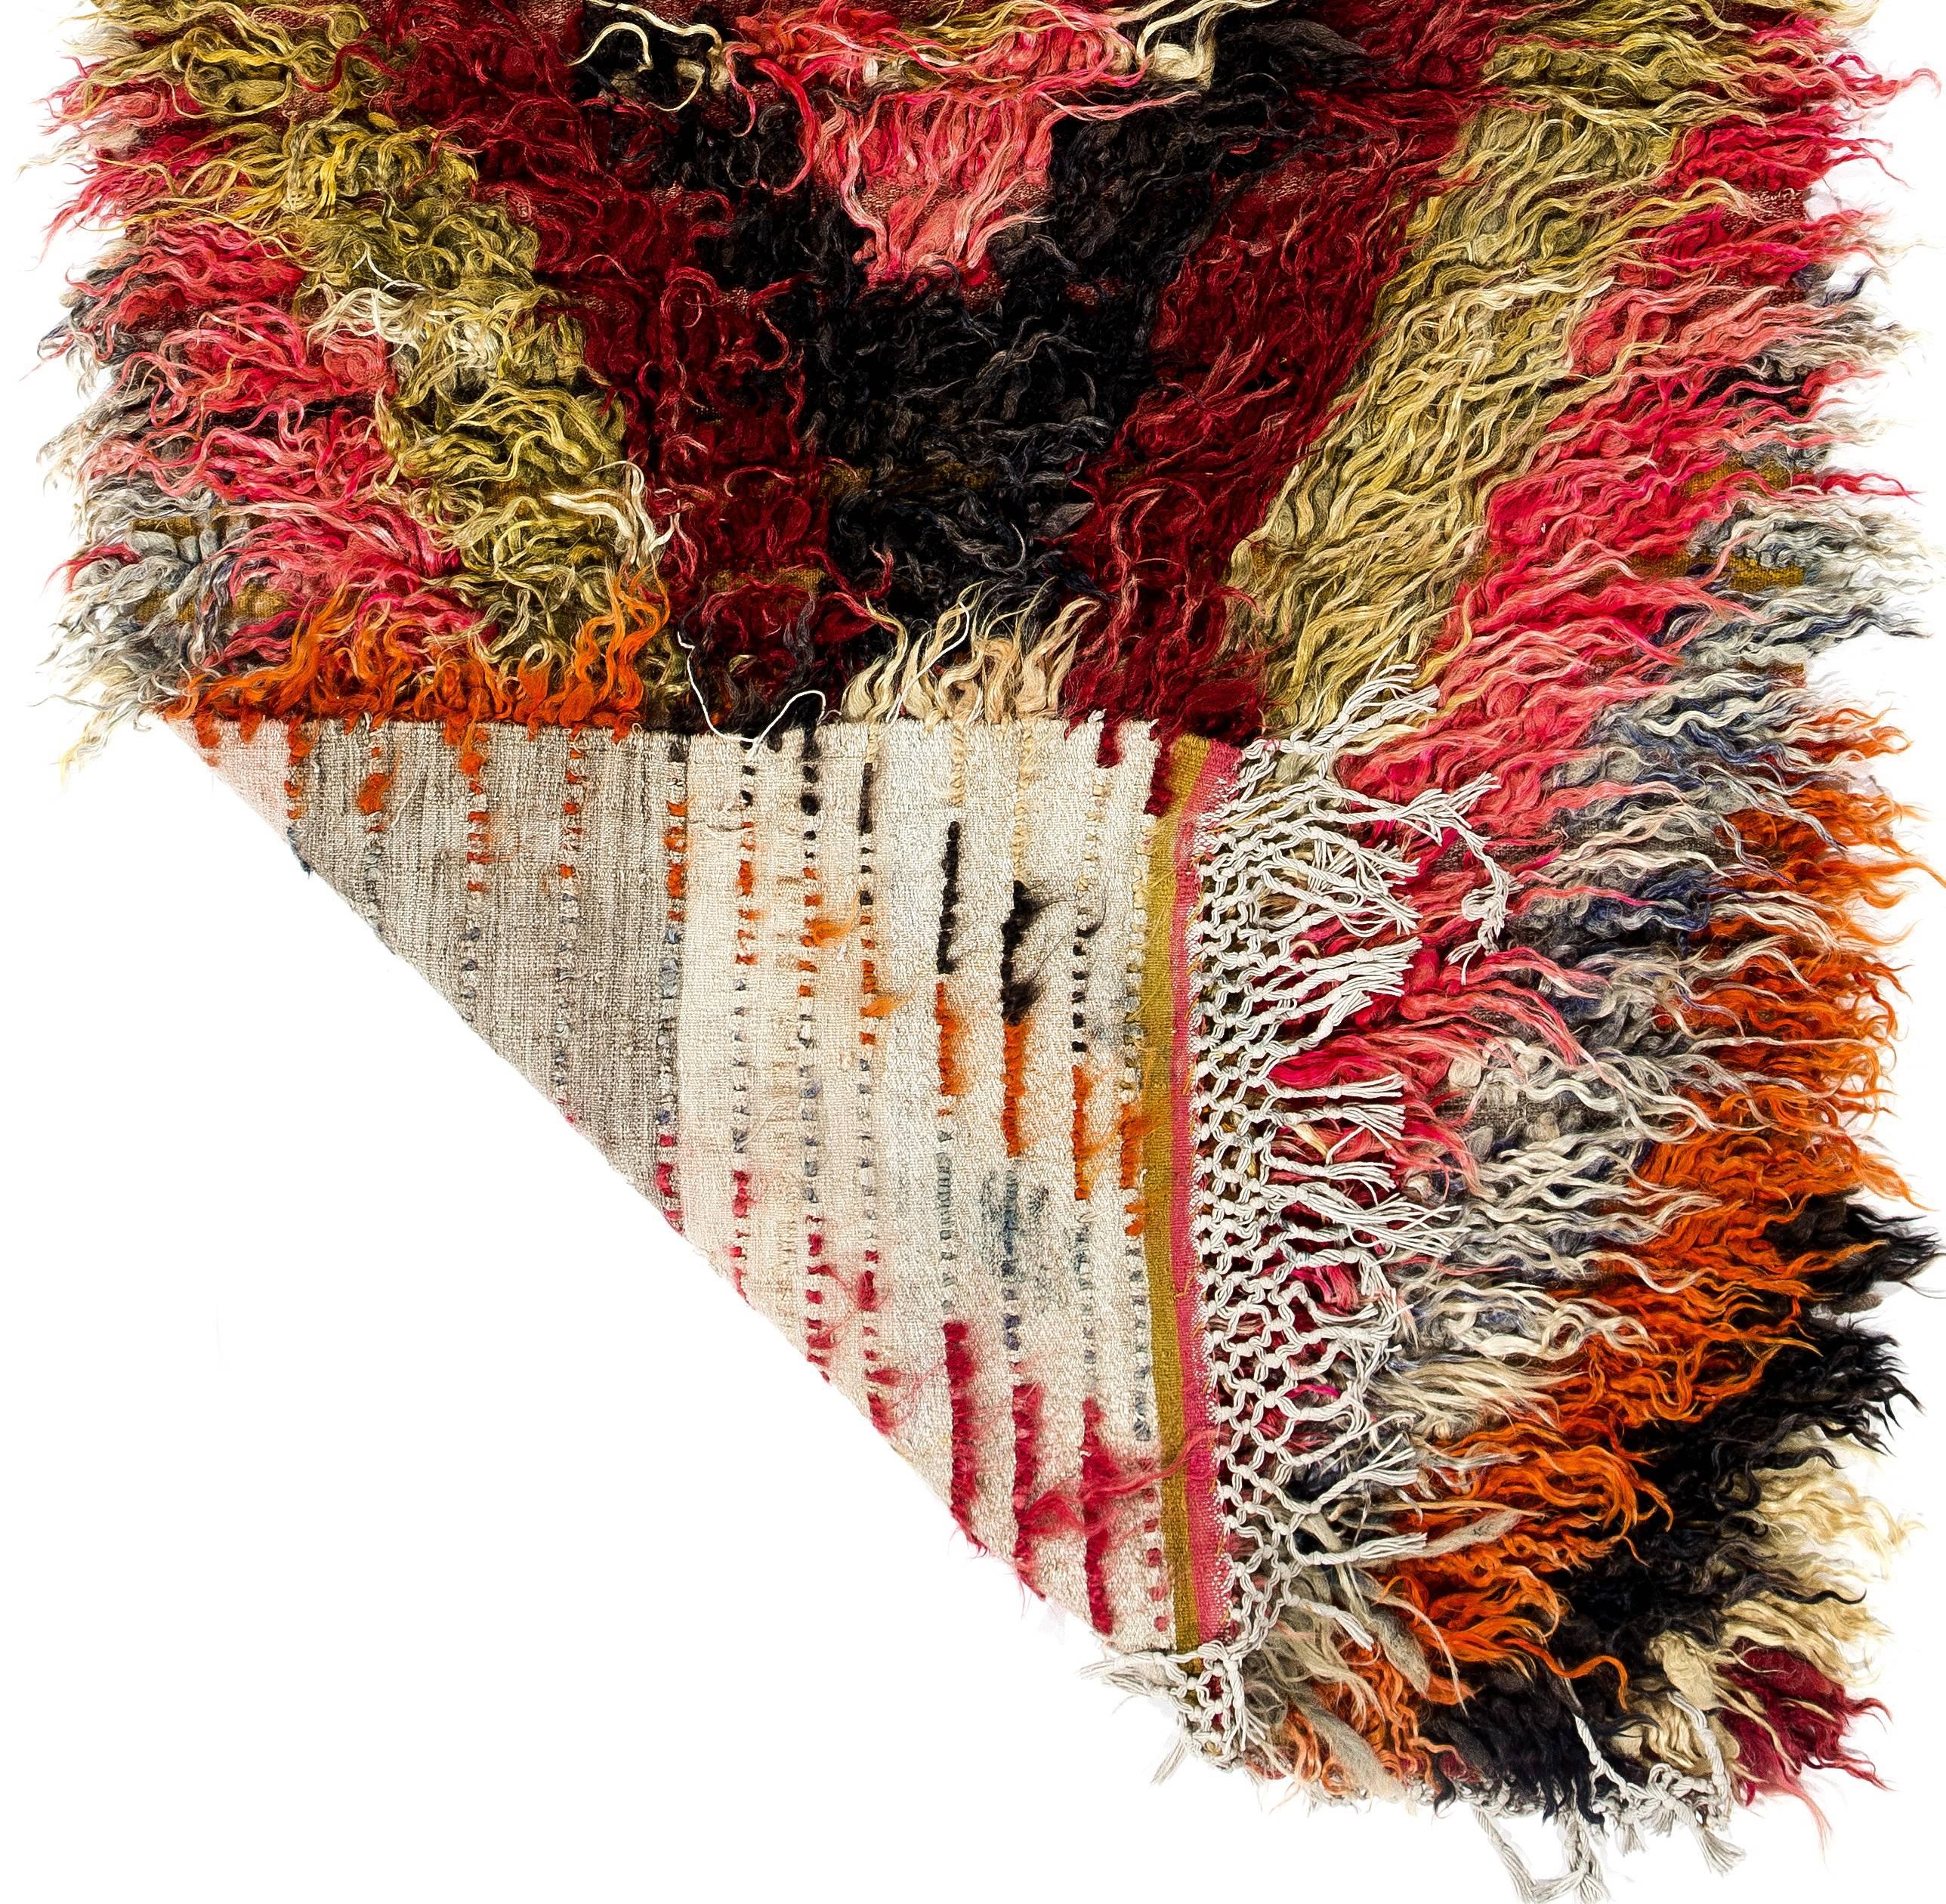 This vintage handmade rug is called "Flikli" in Turkey which is a word for a "flokati" style shag pile (Tulu) handmade rugs produced for daily use by villagers around Karapinar in Central Anatolia. This particular one is made of